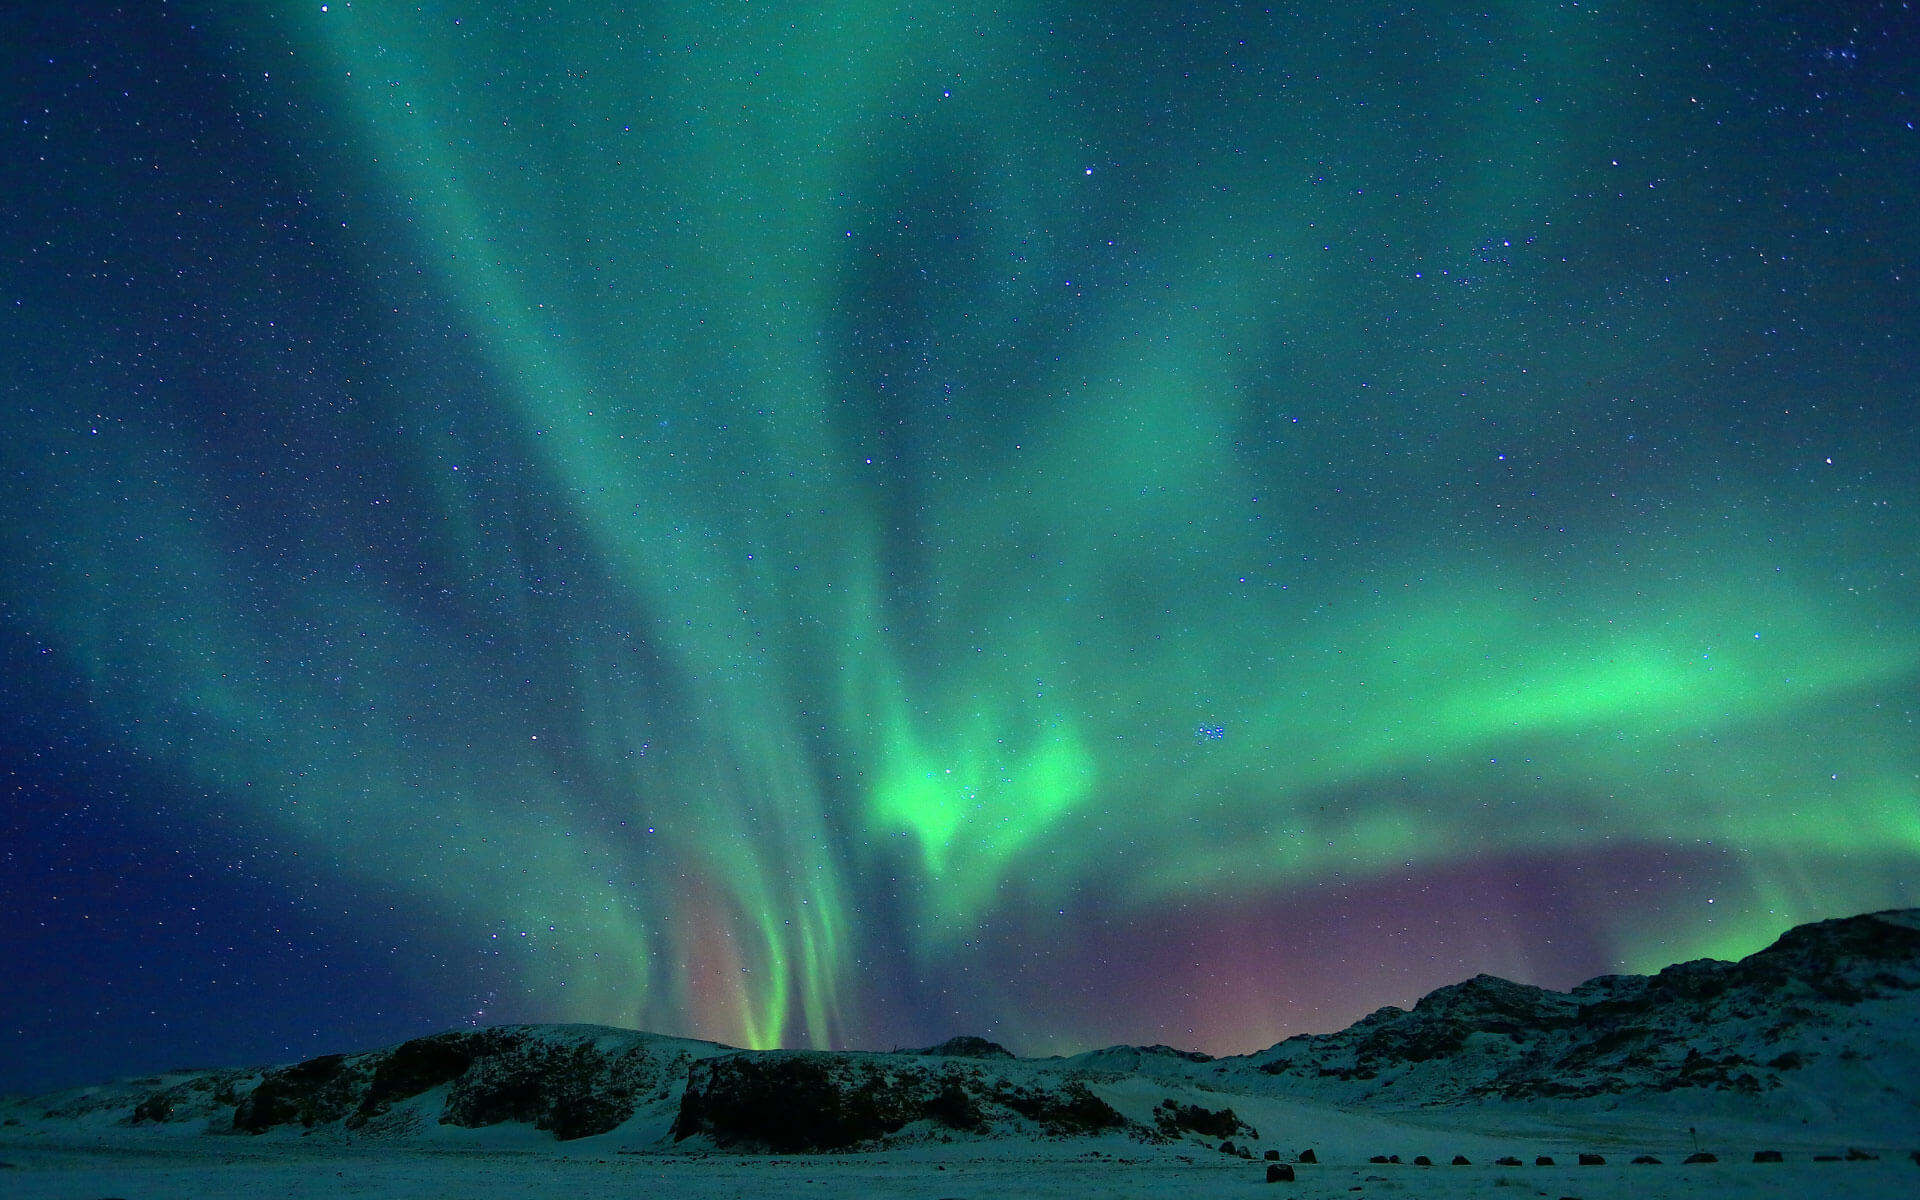 Northern lights in a night sky